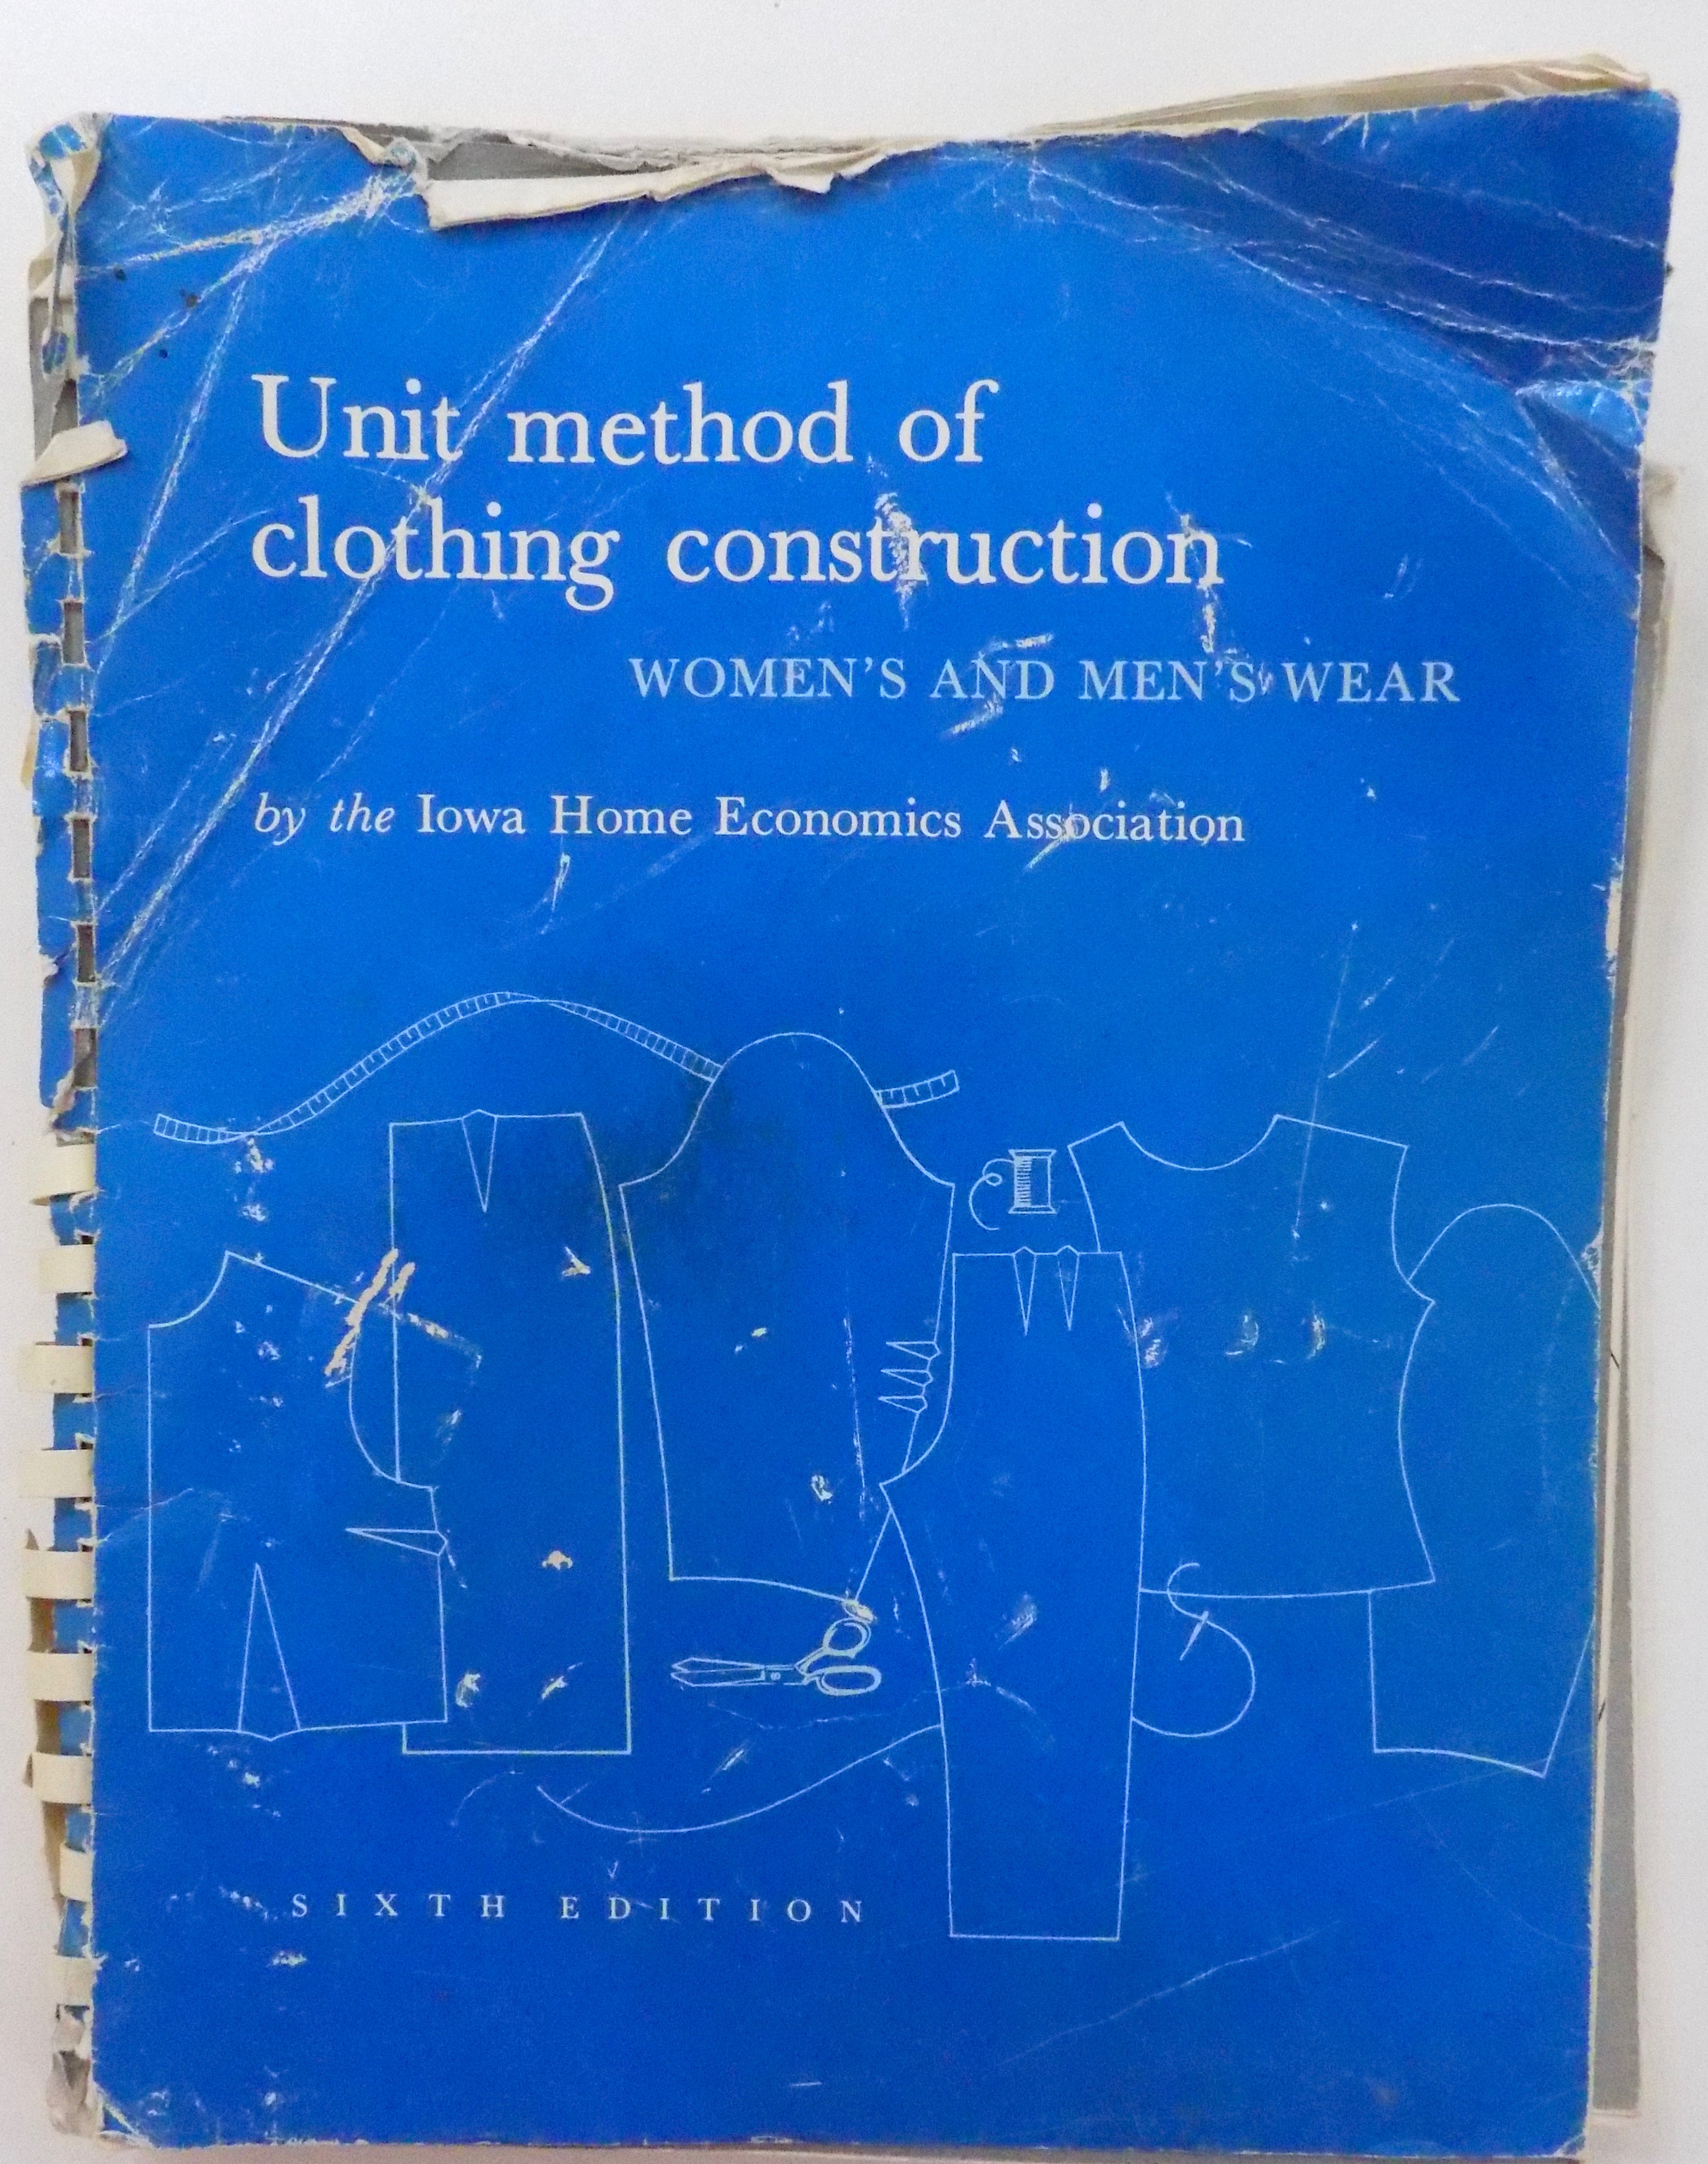 Sewing classes in Chicago: Tchad: Unit Method of Clothing Construction: IHEA: Workroom Sewing studio Library copy: